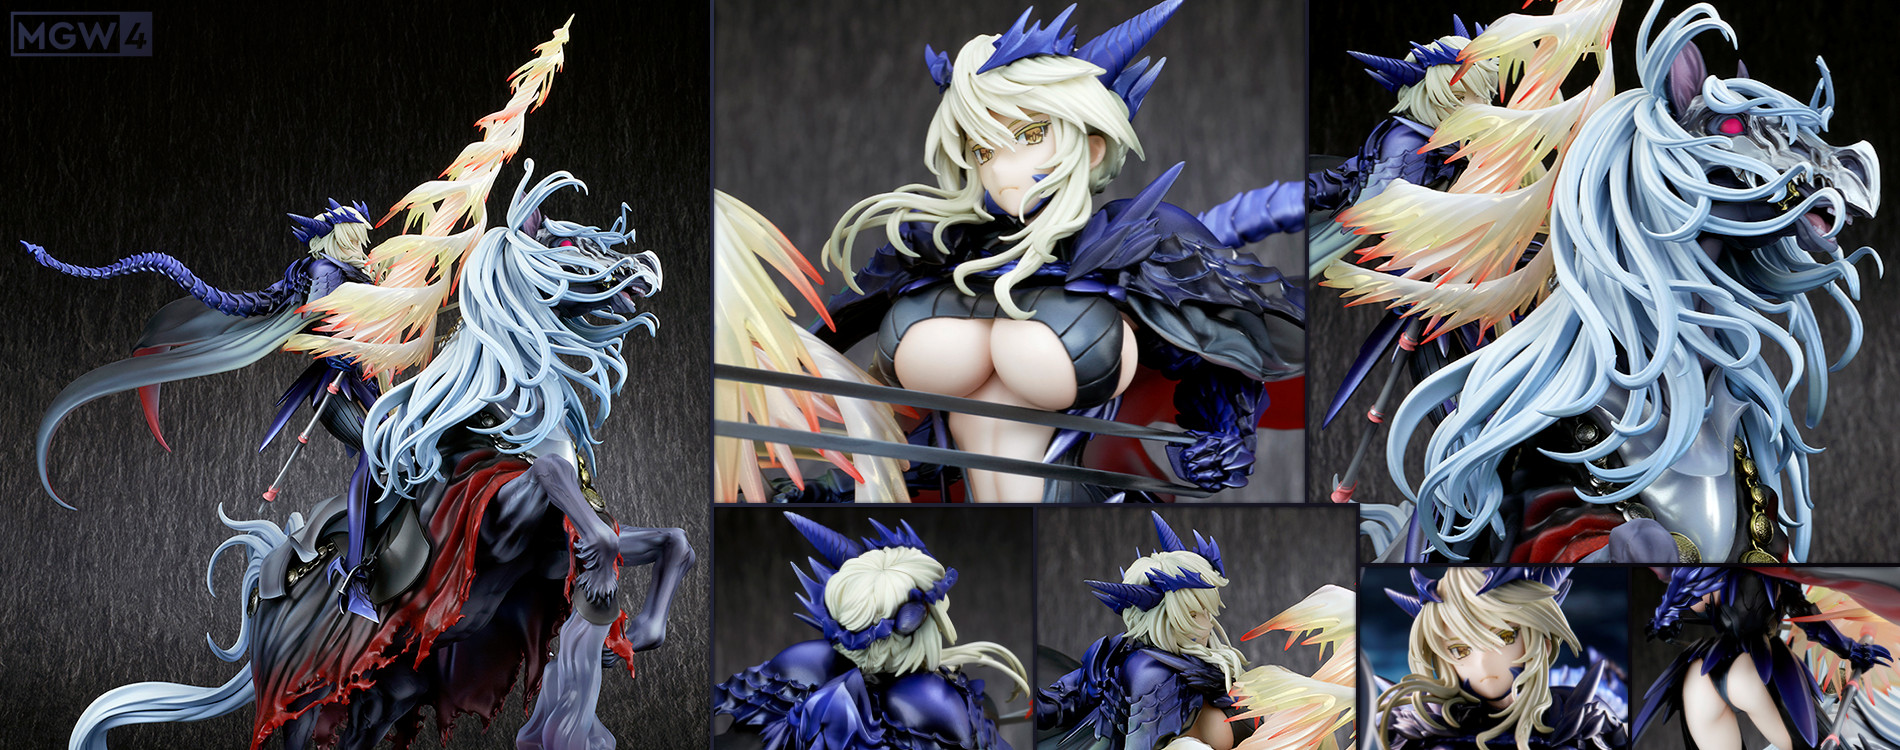 Lancer Altria Pendragon Alter Third Ascension by quesQ from Fate Grand Order MyGrailWatch Anime Figure Guide